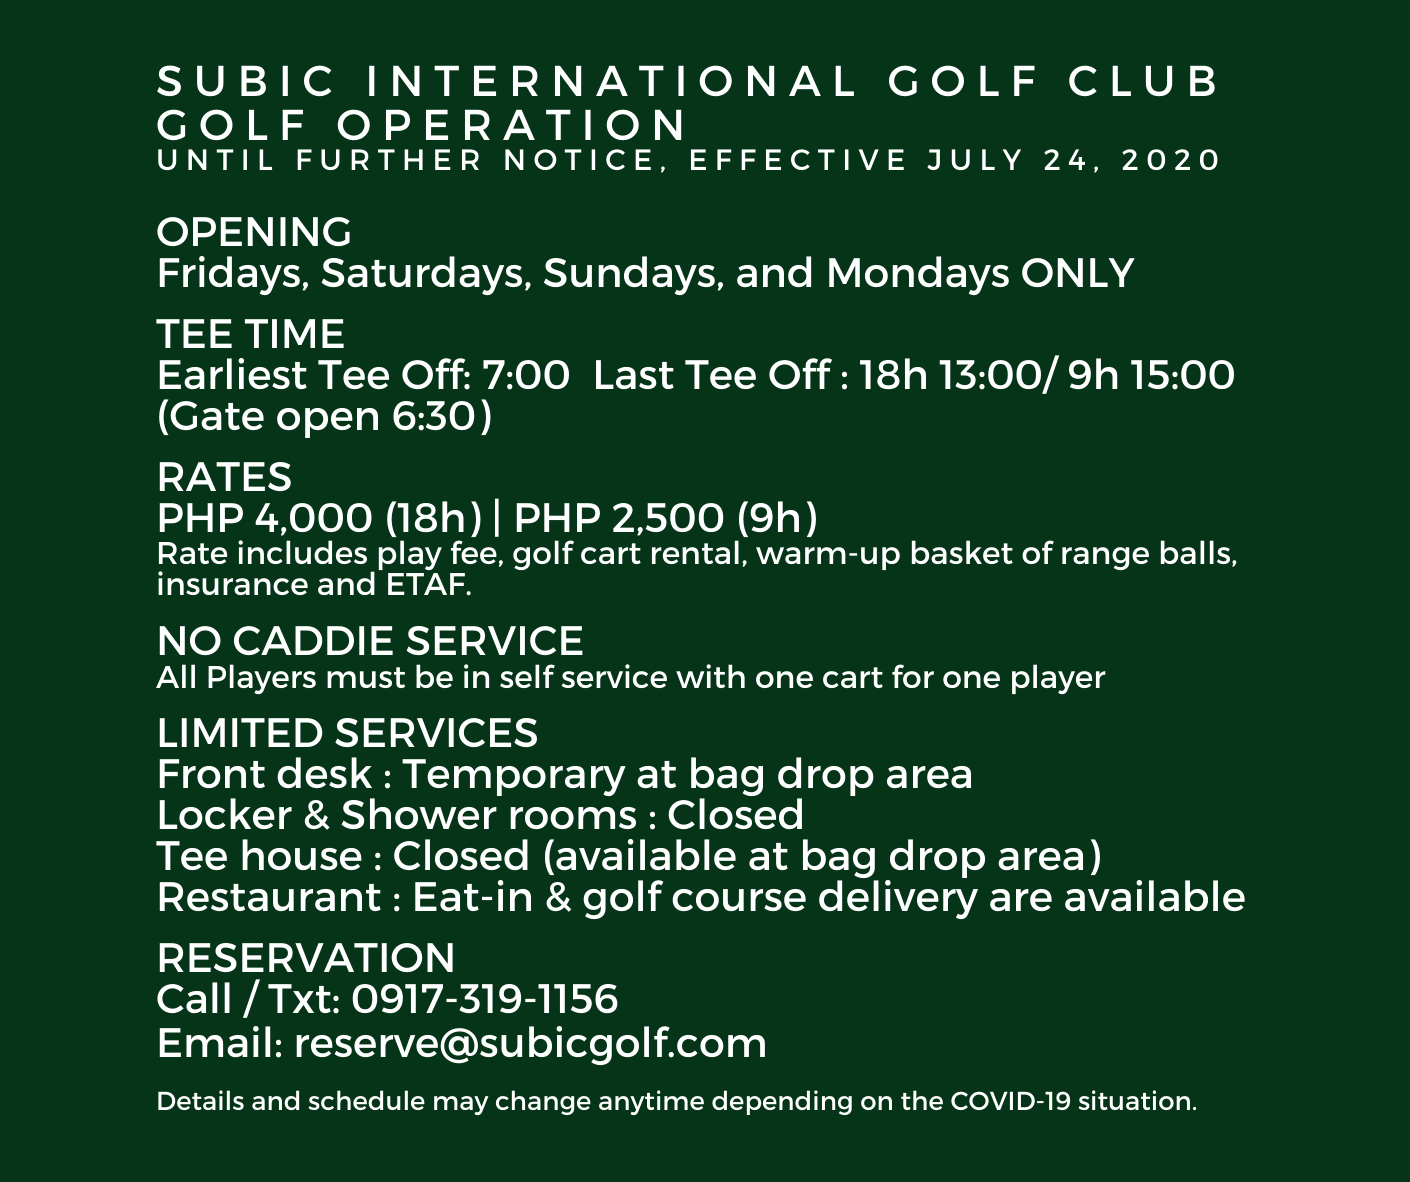 SIGC Golf Operation Update Effective July 24th